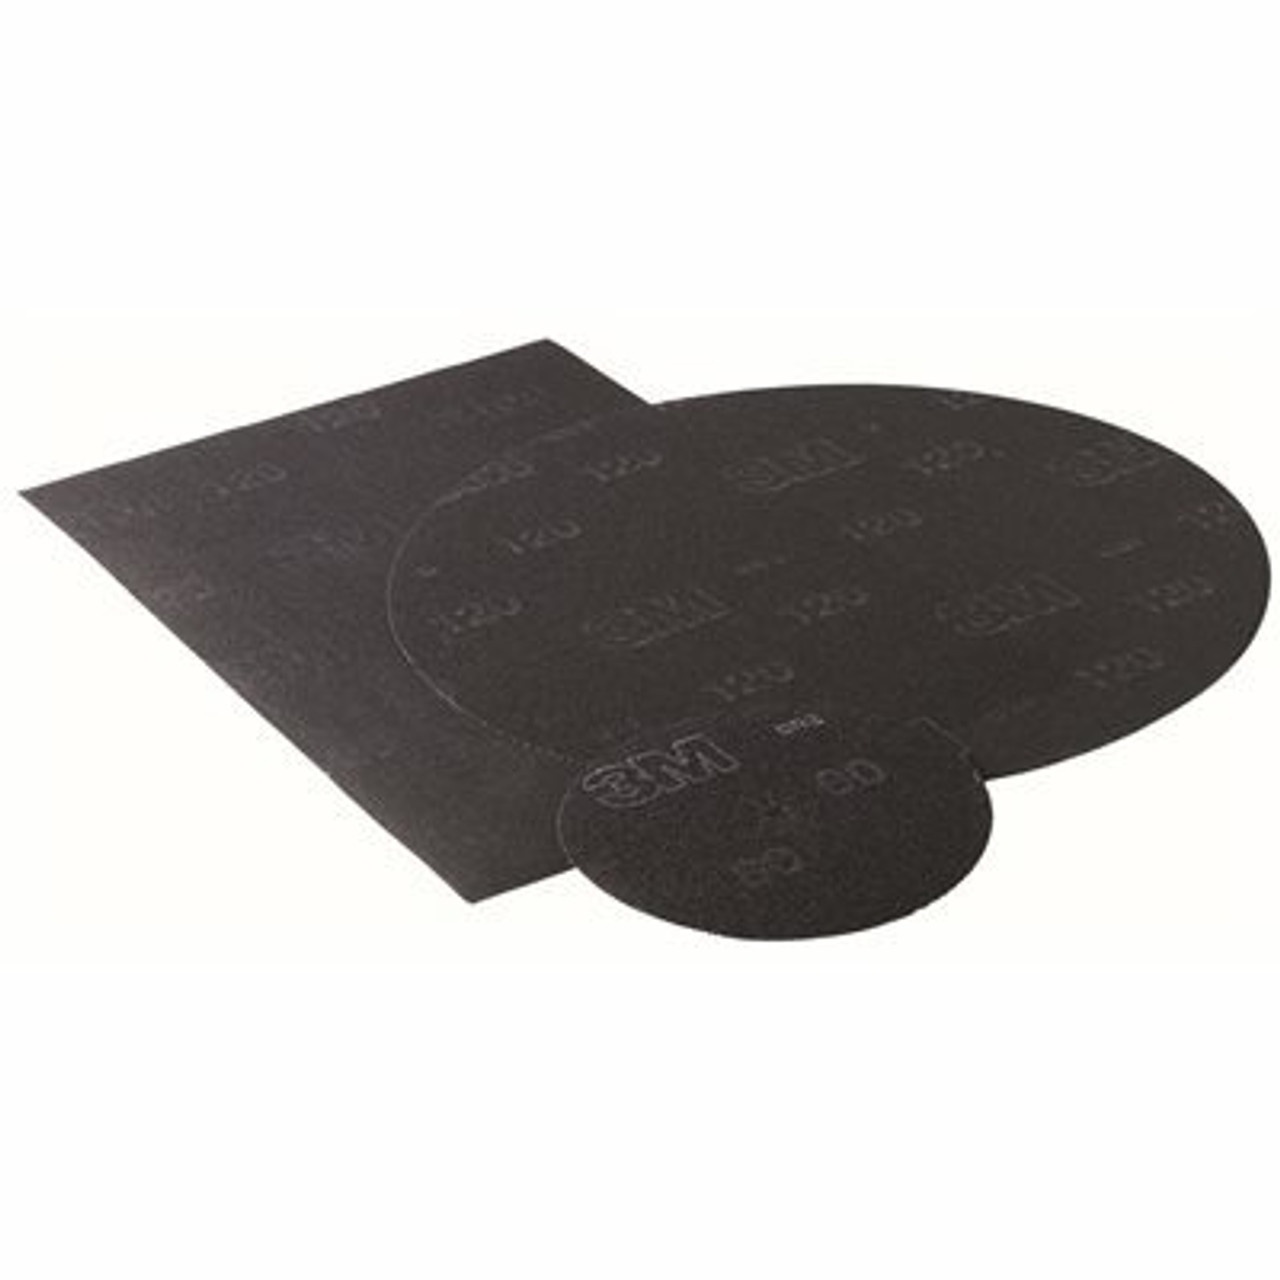 3M 17 In. 80 Grit Coarse No Hole Disc Sanding Screen (12-Pack)